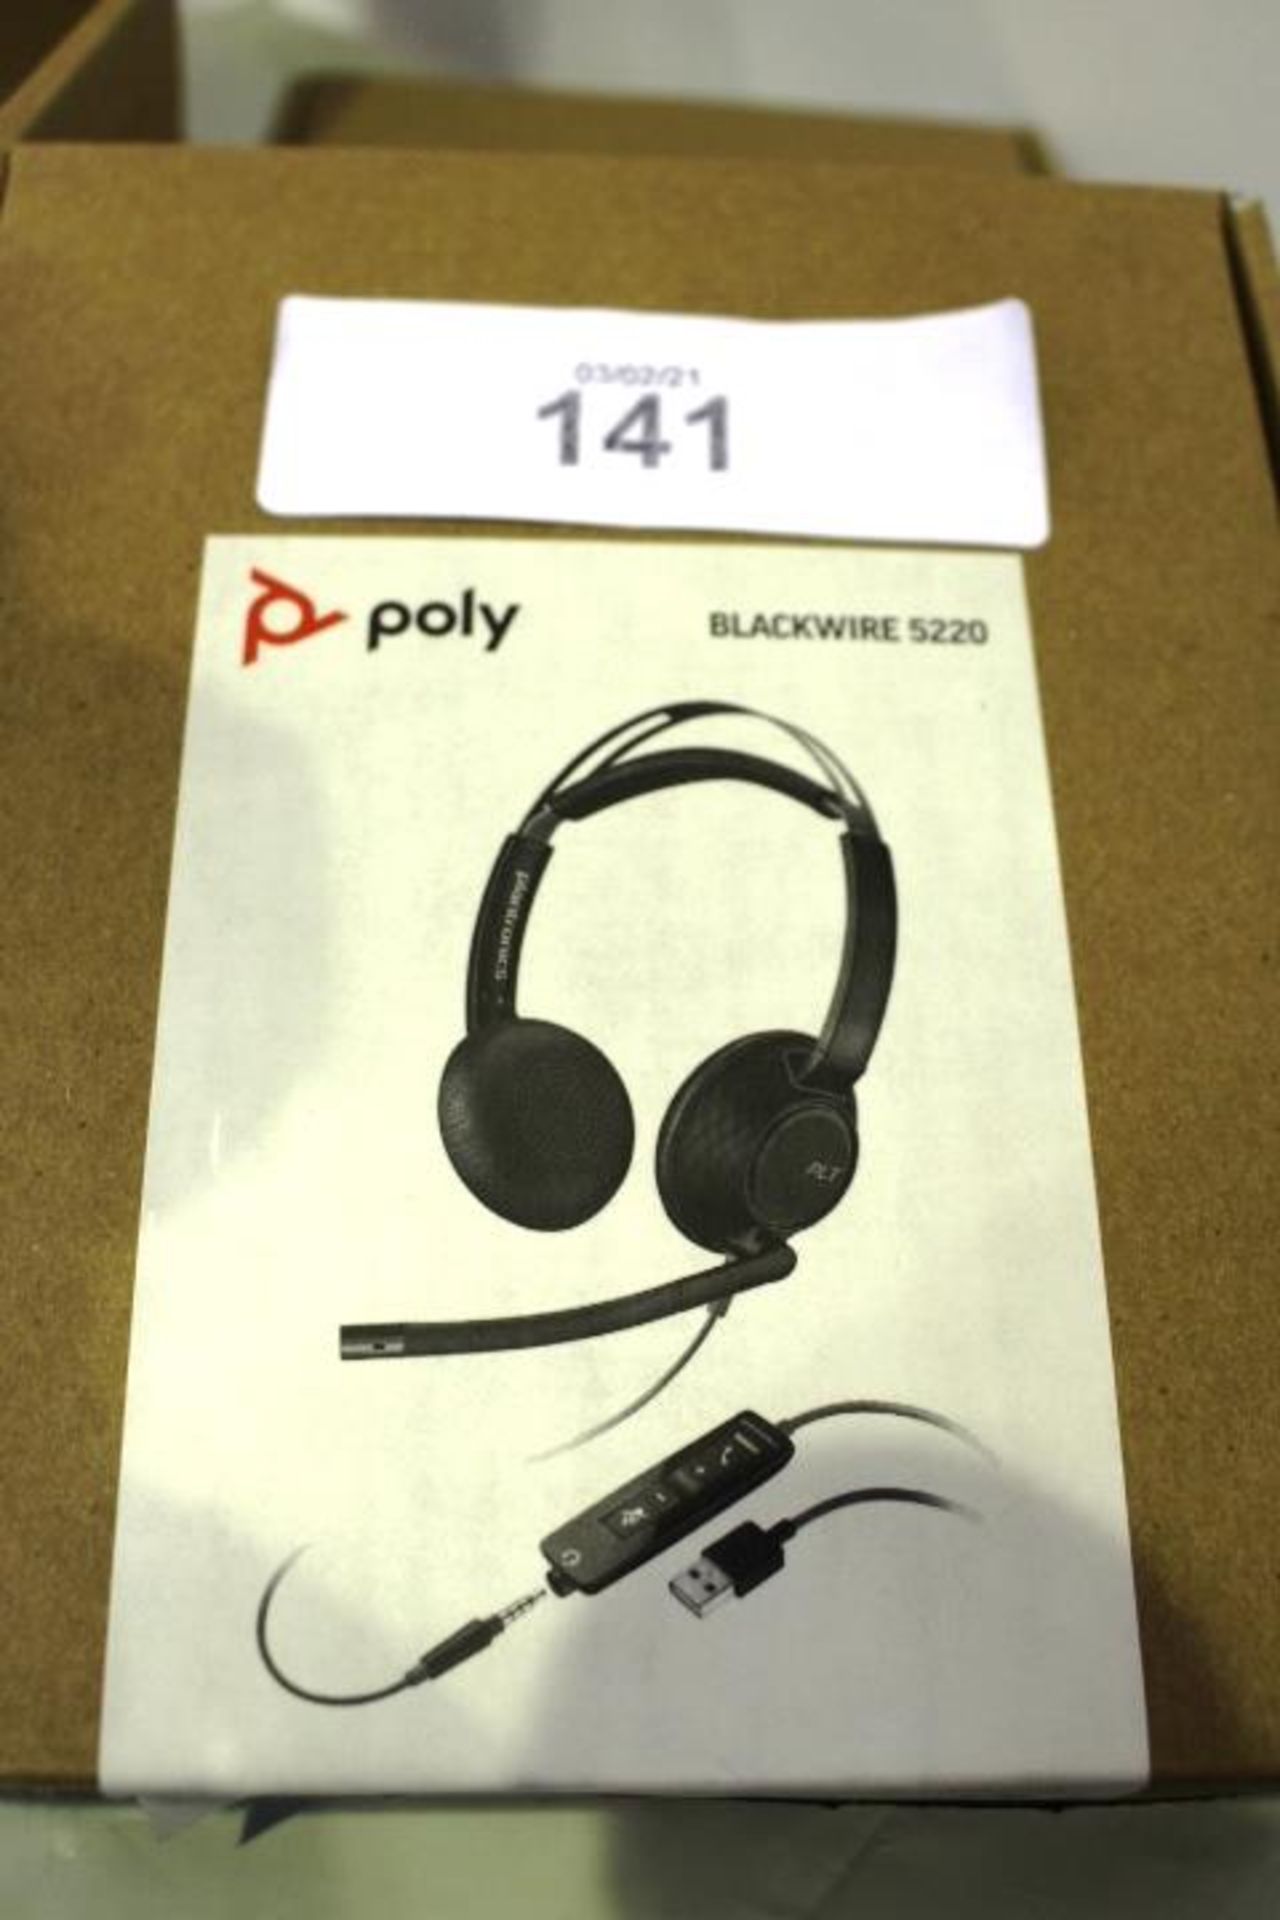 4 x Poly Blackwire C5220 office headphones, model 207576-01 - new in box (cab3) - Image 2 of 3